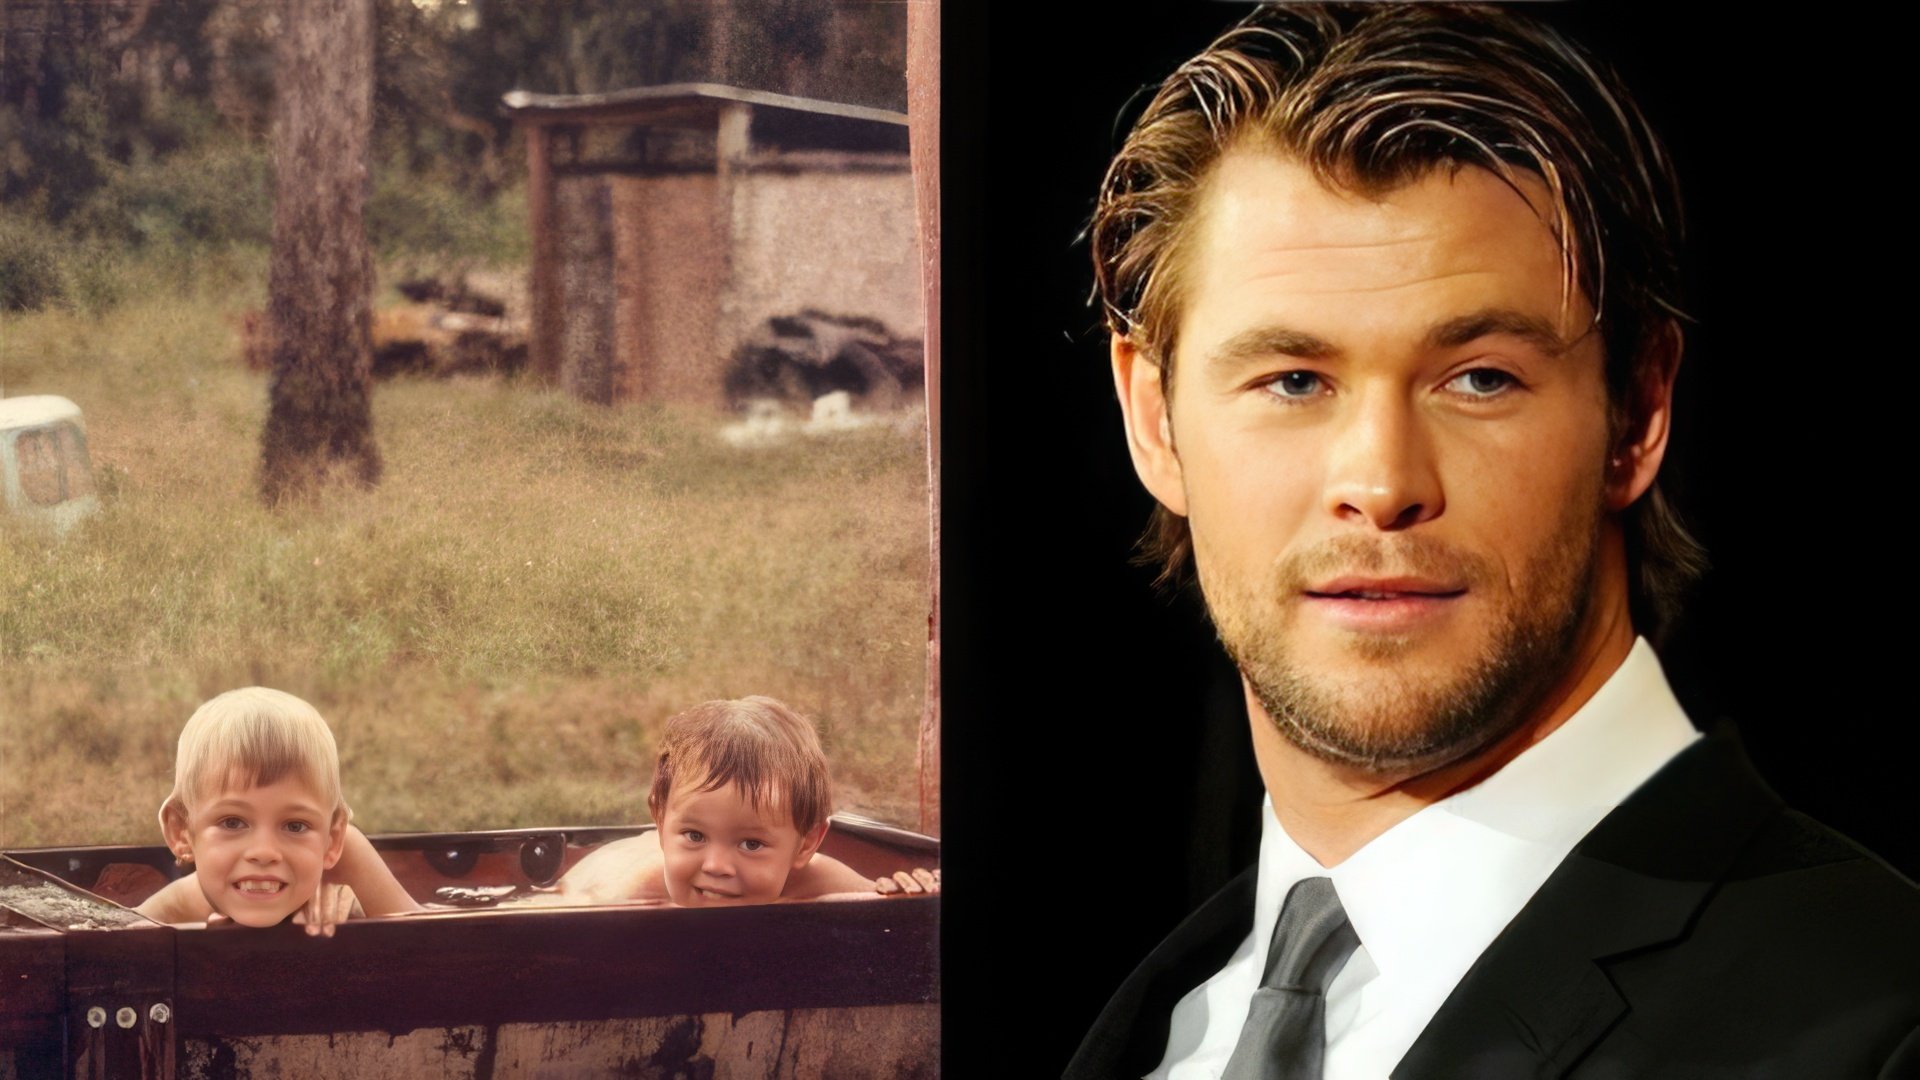 Chris Hemsworth in his childhood and now